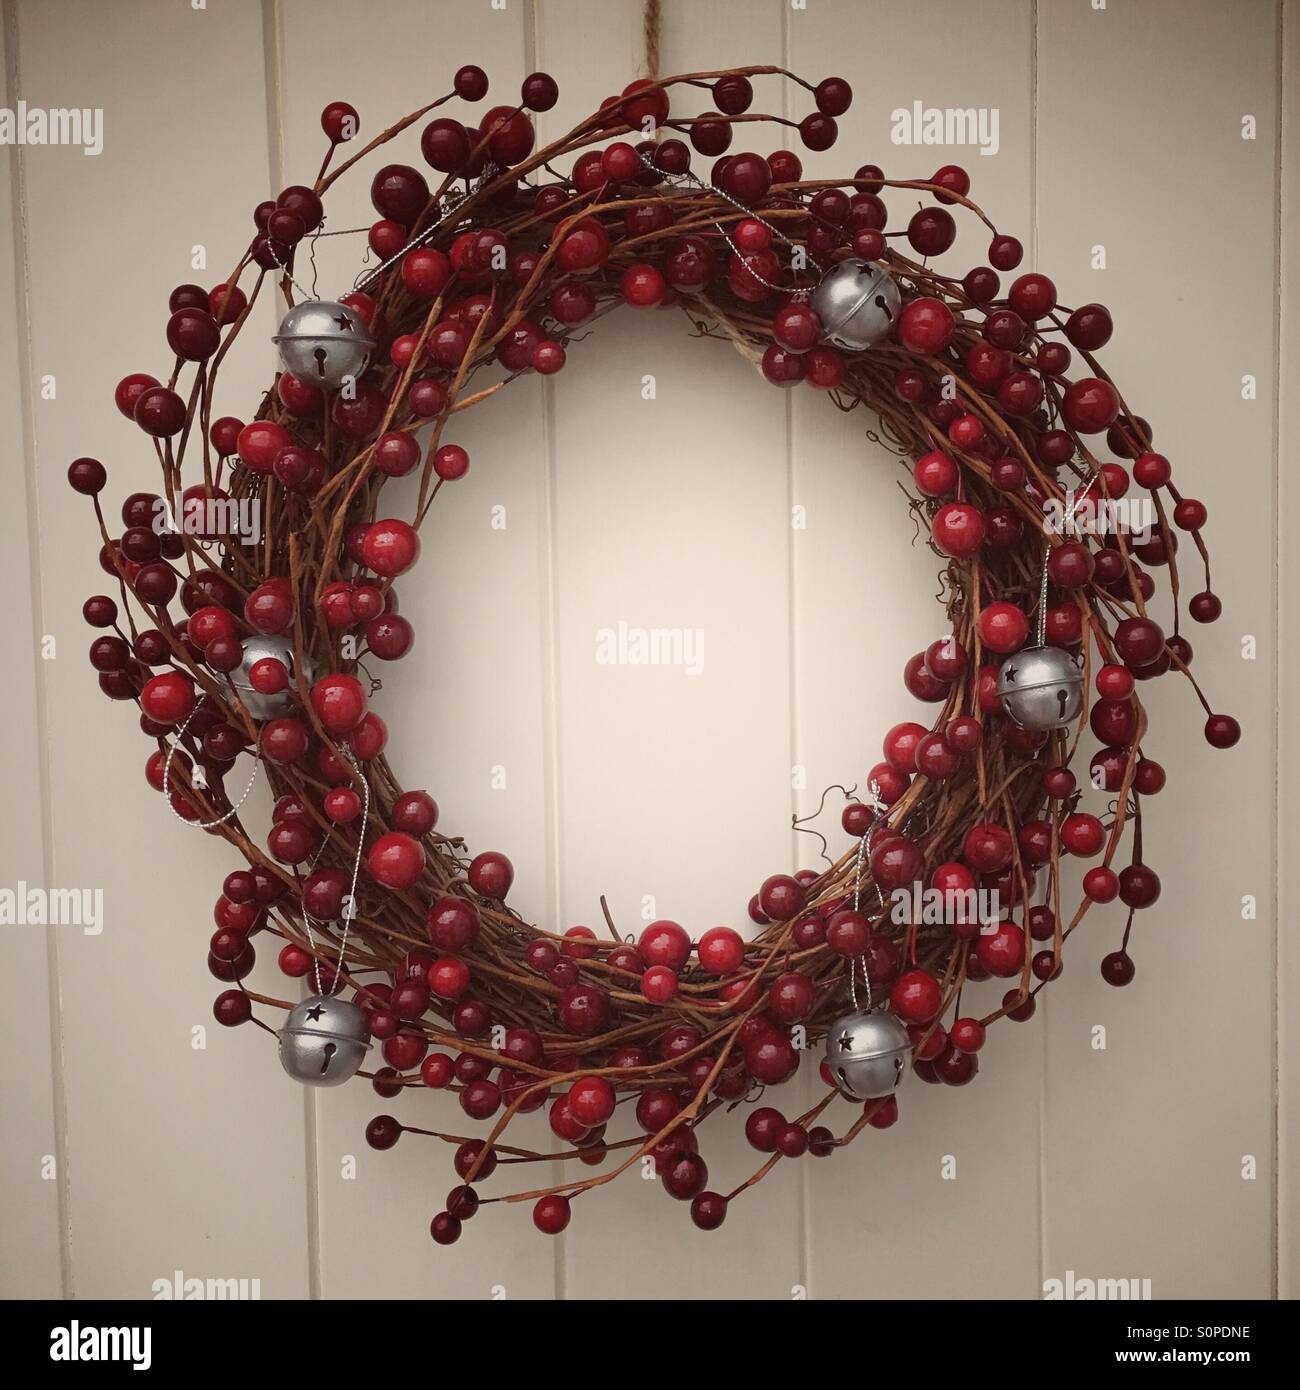 Evergreen and Berry Wreath